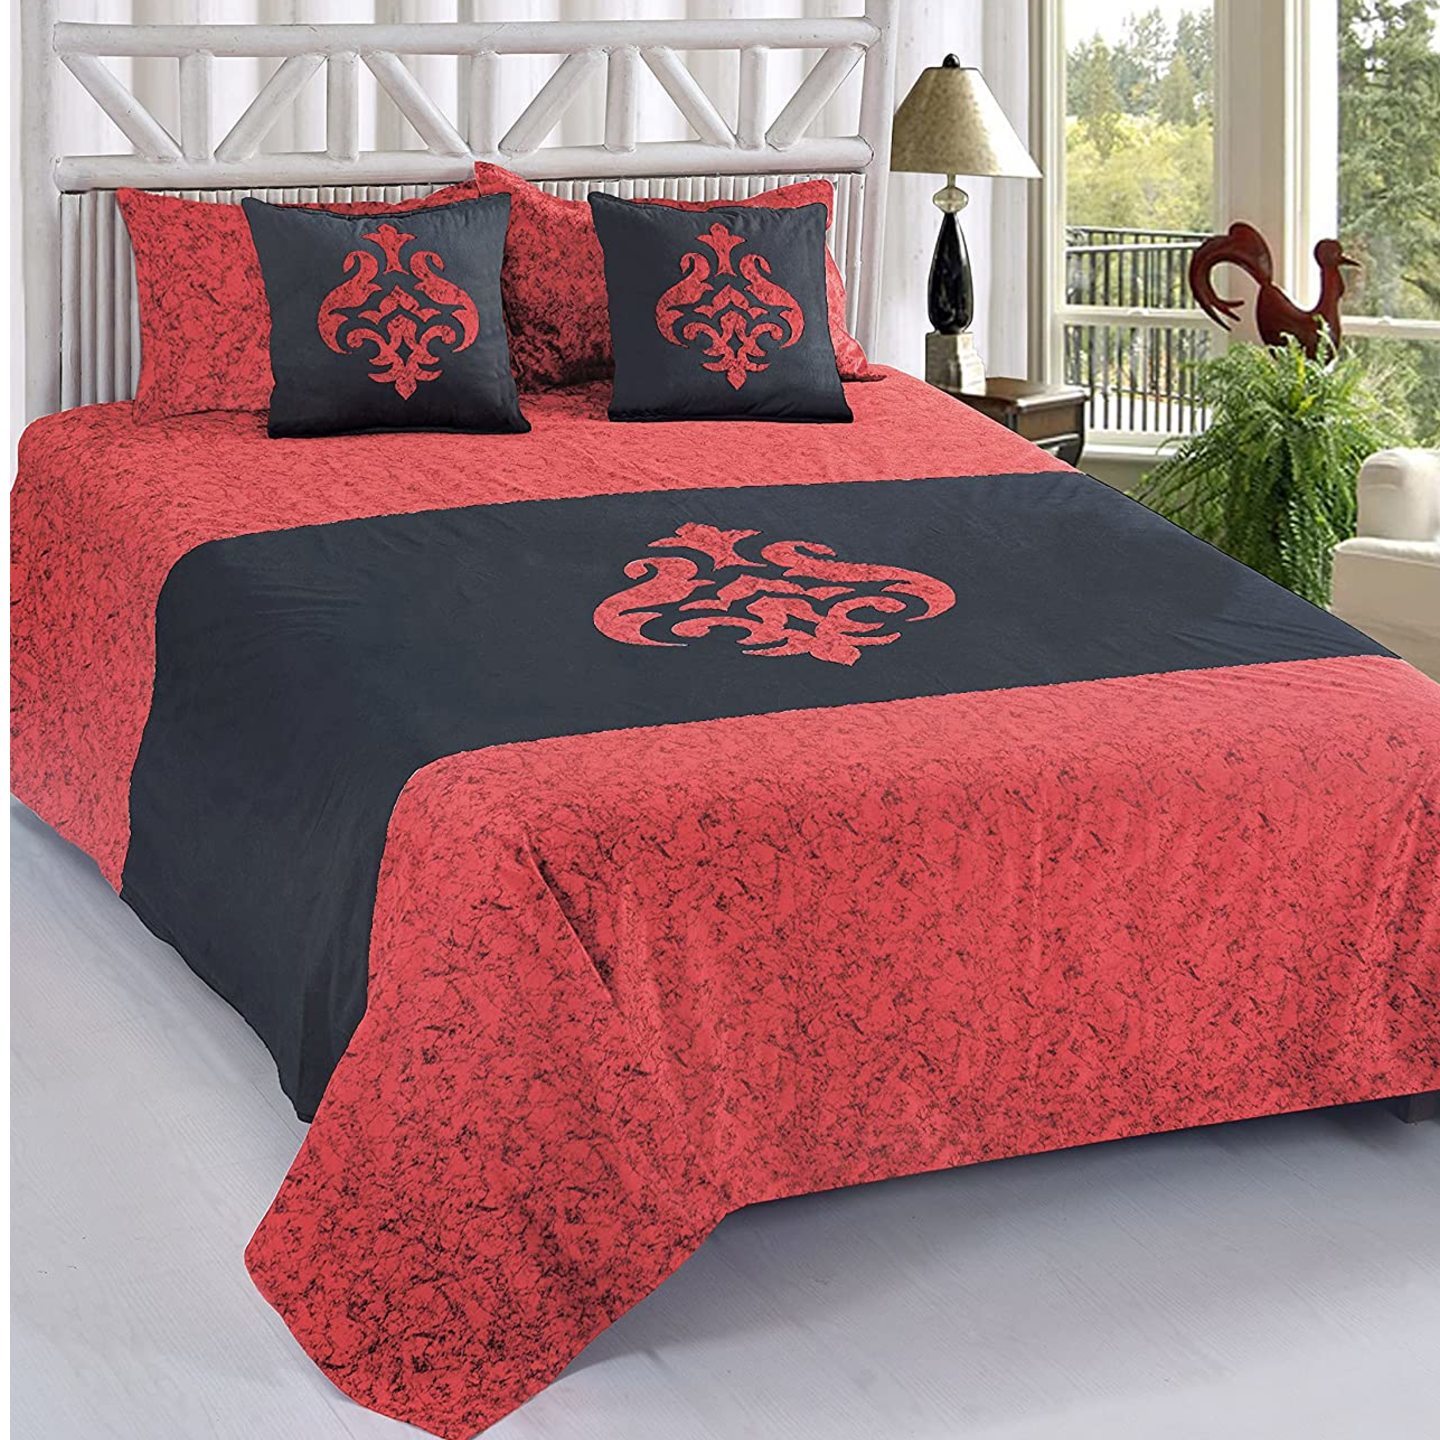 Hantex Home Double Bed Sheet with 2 Pillow Covers and 2 Cushions Covers , king Size - 90'' x 100'' Damask design